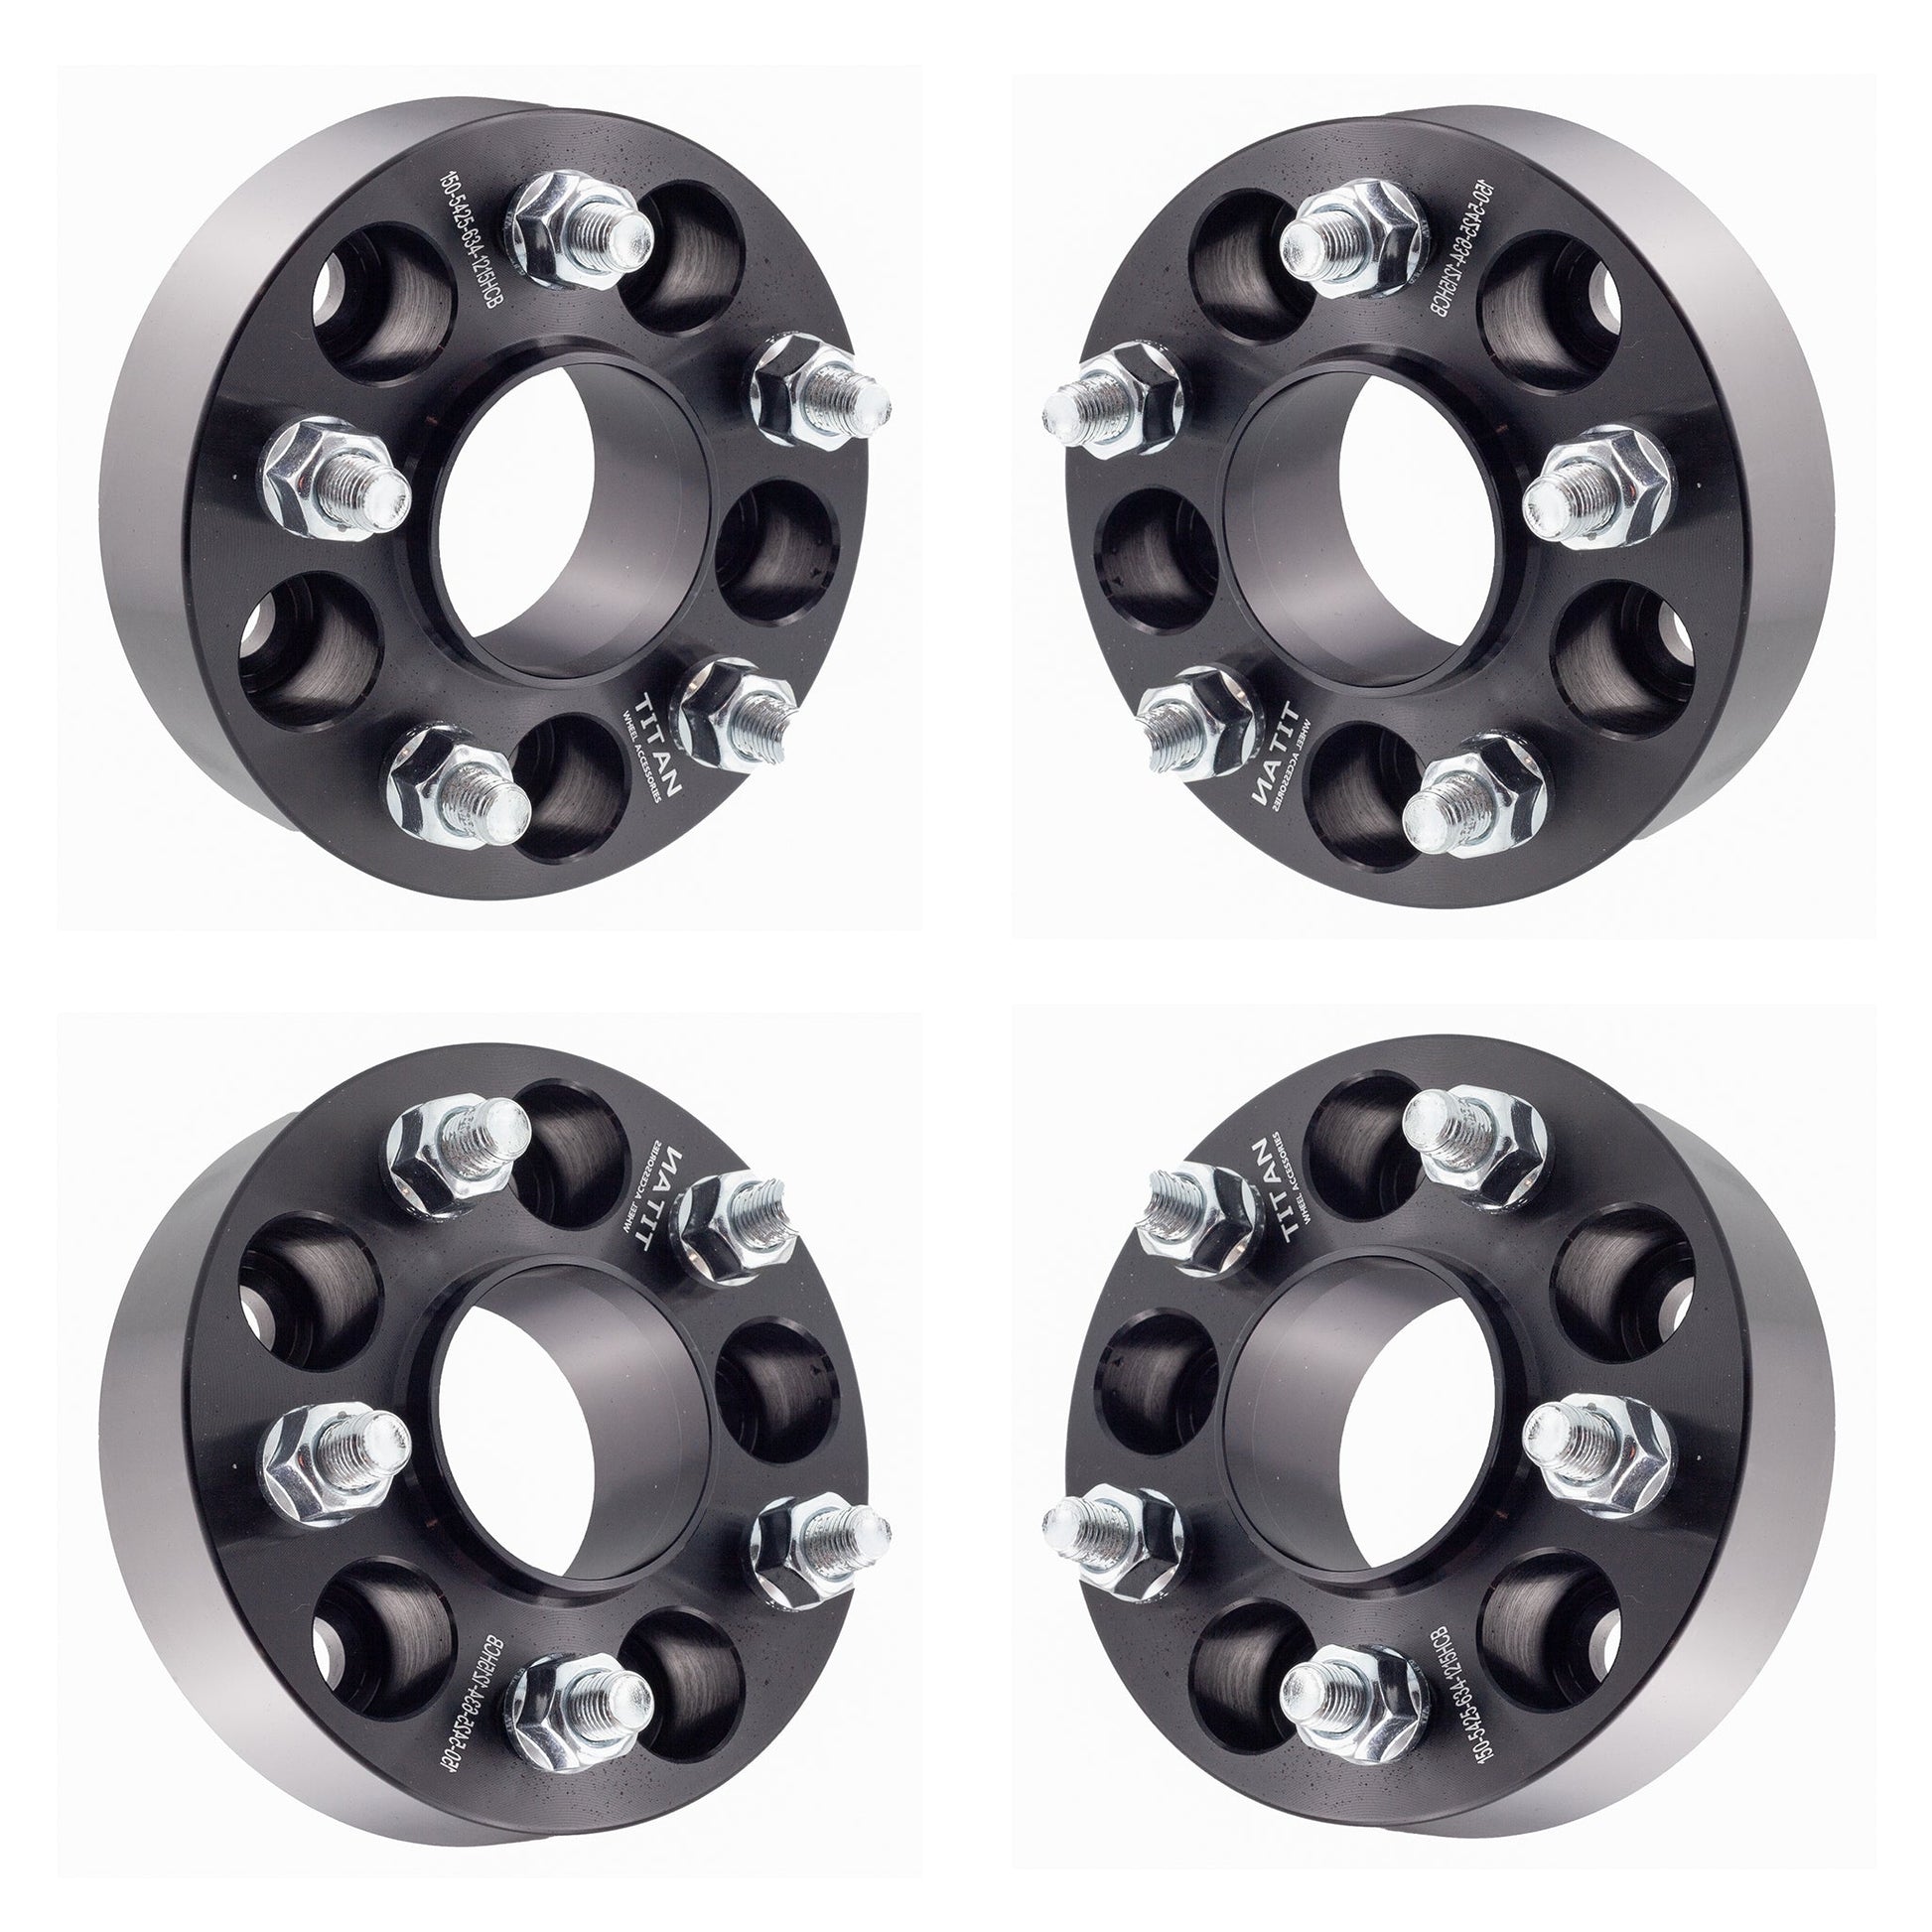 1.5" (38mm) Titan Wheel Spacers for Ford Bronco Sport Escape | 5x4.25 (5x108) | 63.4 Hubcentric | 12x1.5 Studs |  Set of 4 | Titan Wheel Accessories